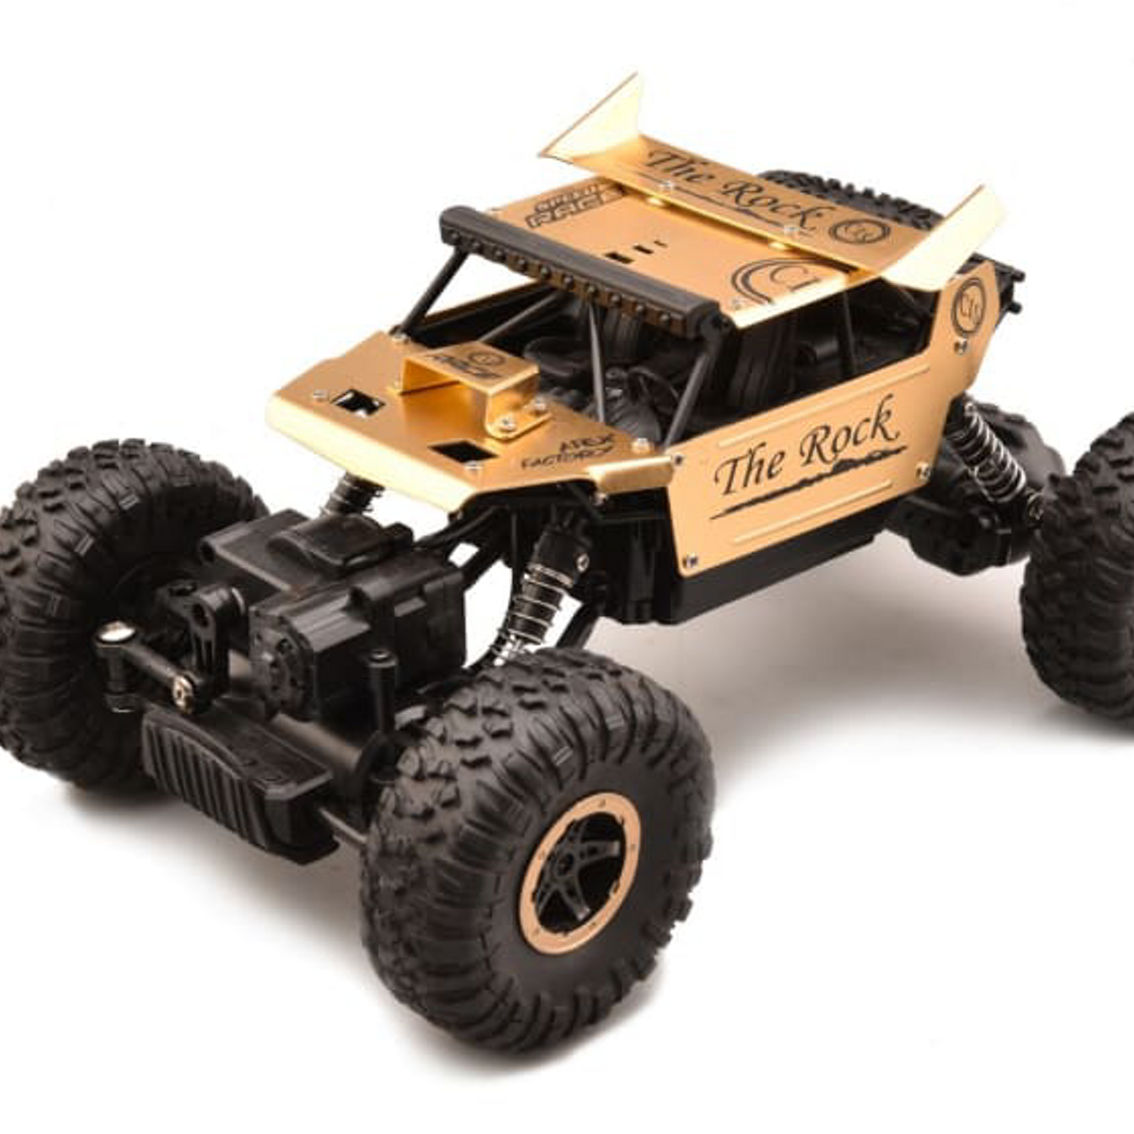 CIS-699-108-G 1:18 scale 4WD rock climber 2.4 GHz 16.5 MPH - Image 2 of 5